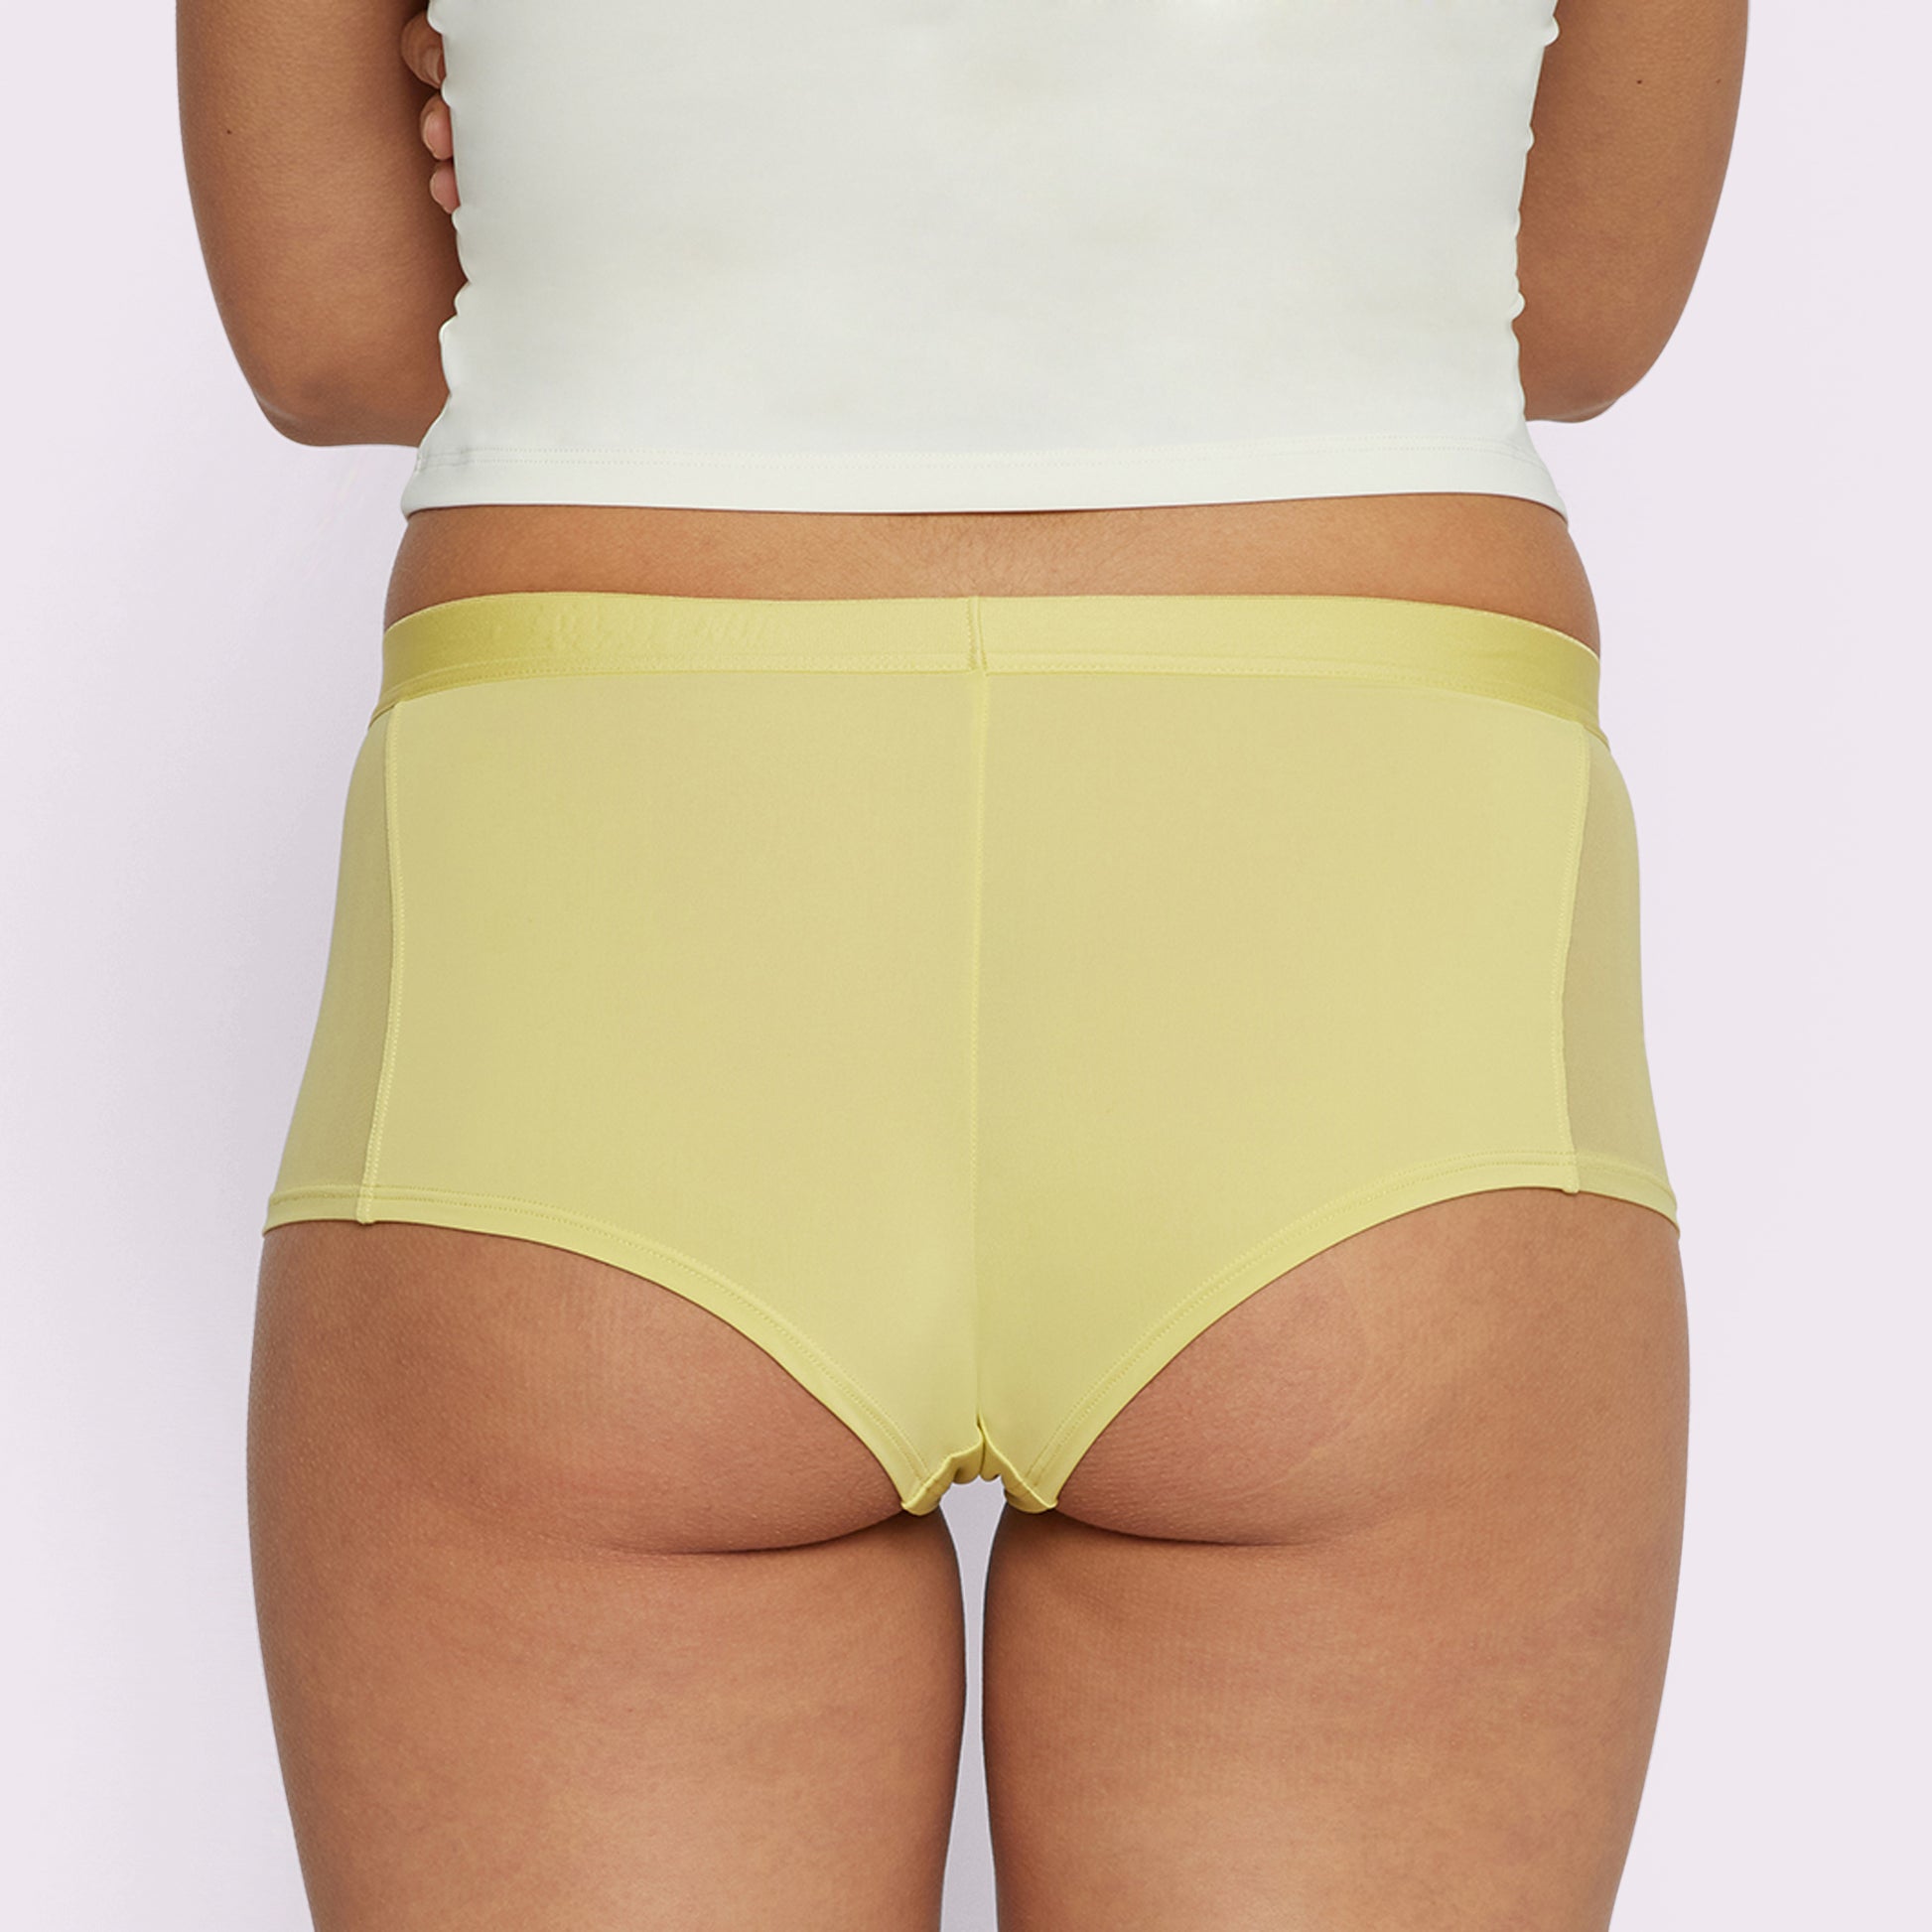 100% Cotton Boyshorts Panties for Women High Waisted Underwear Ladies Full  Briefs Panty Sleep Underpants Lingerie (Color : Yellow, Size : 100 L)